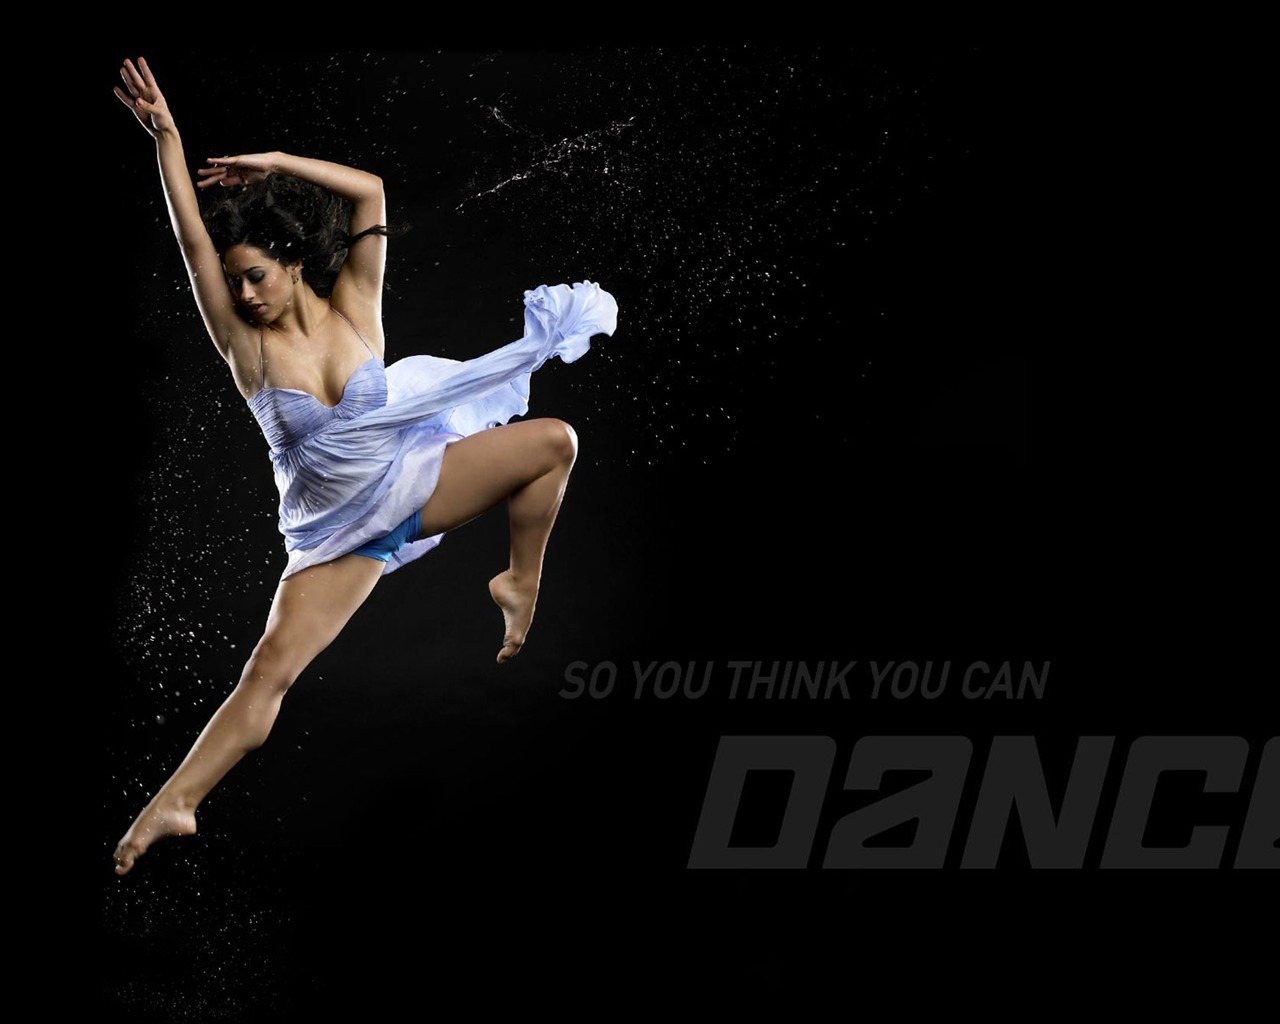 So You Think You Can Dance wallpaper (1) #3 - 1280x1024